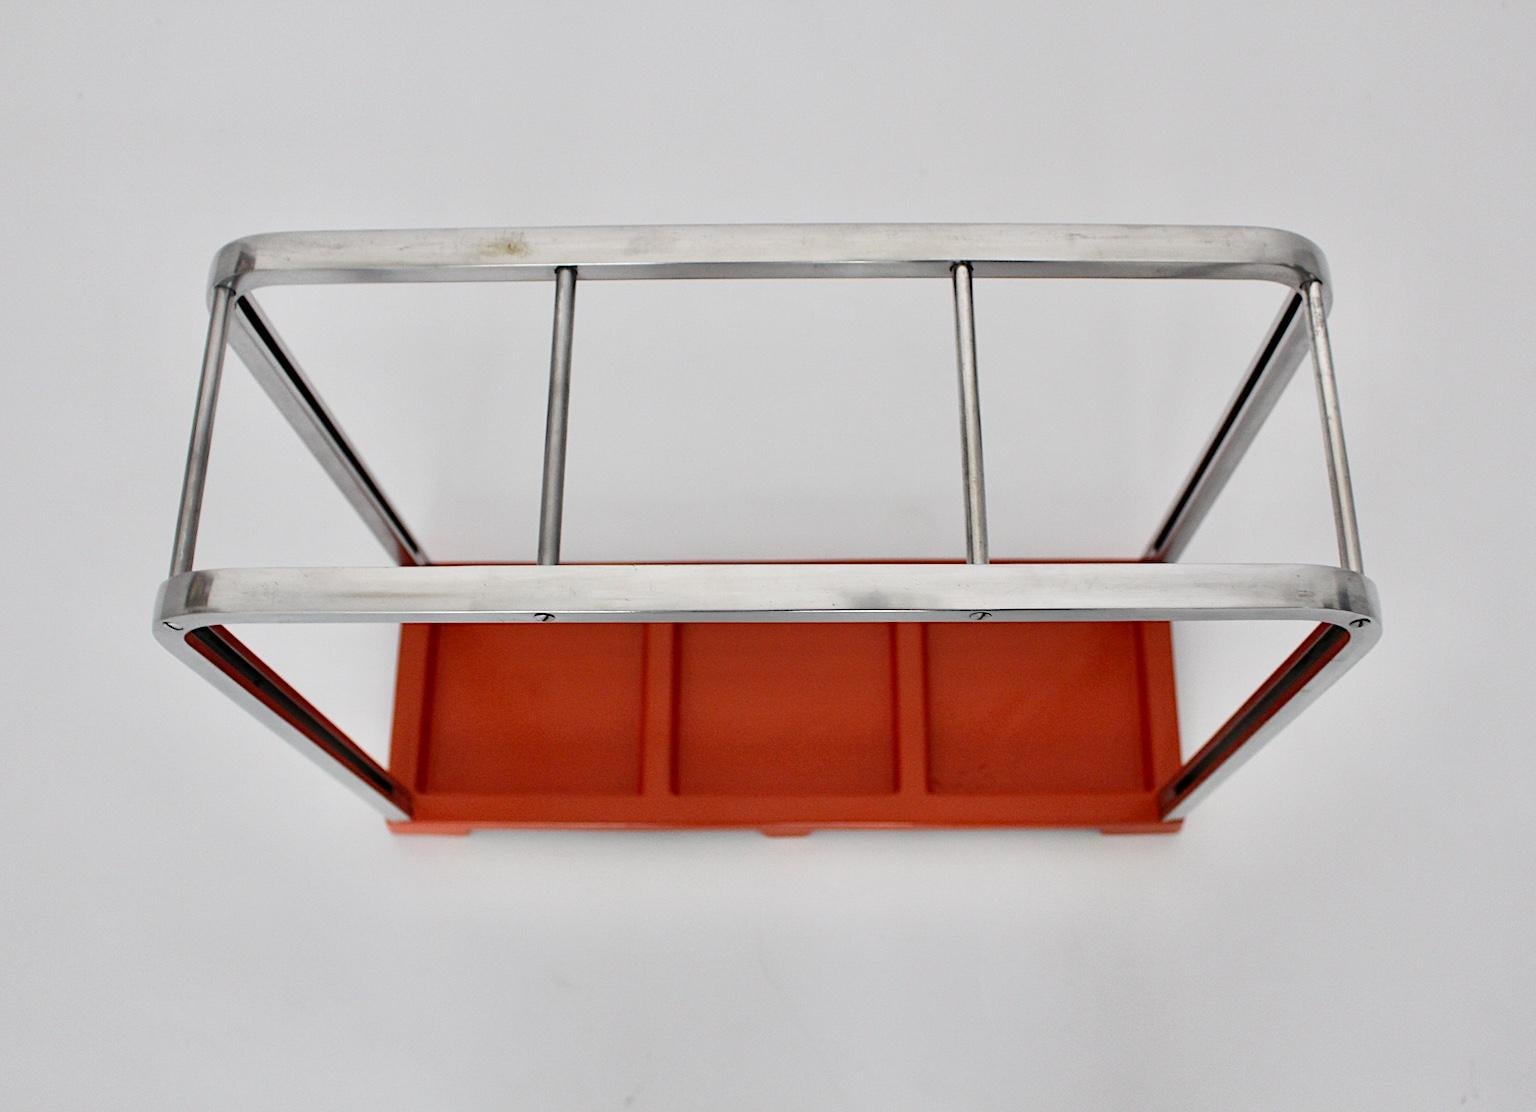 Bauhaus Art Deco Vintage Red Silver Aluminum Umbrella Stand, 1930s, Germany For Sale 8